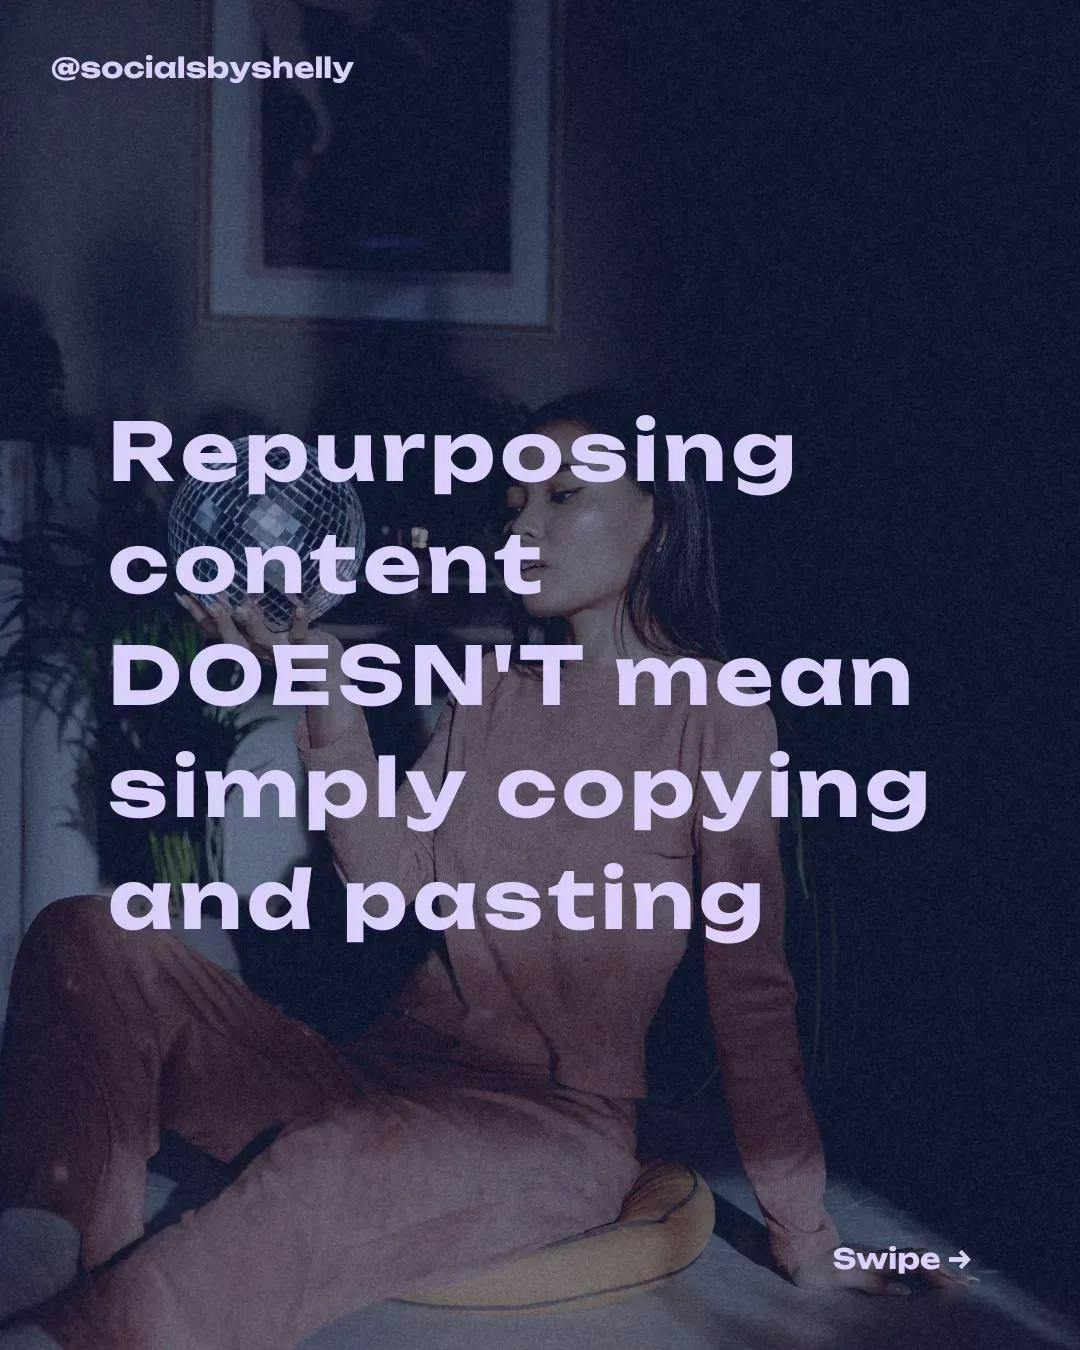 Instagram post title: REPURPOSING CONENT DOESN'T MEAN SIMPLY COPYING AND PASTING